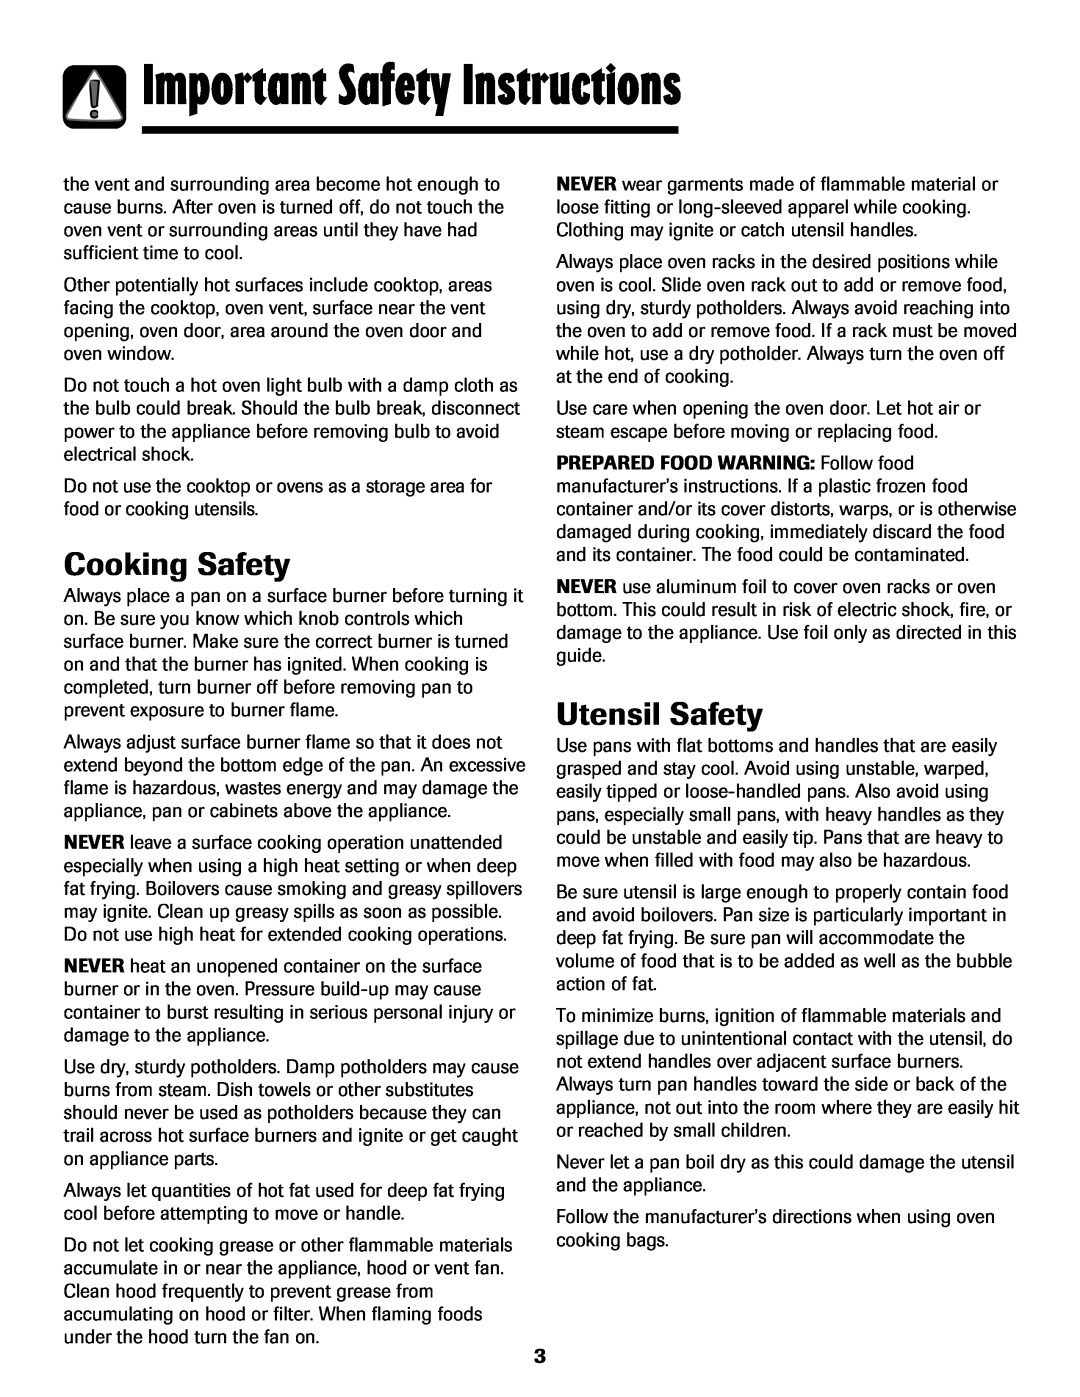 Maytag MGS5875BDW important safety instructions Cooking Safety, Utensil Safety, Important Safety Instructions 